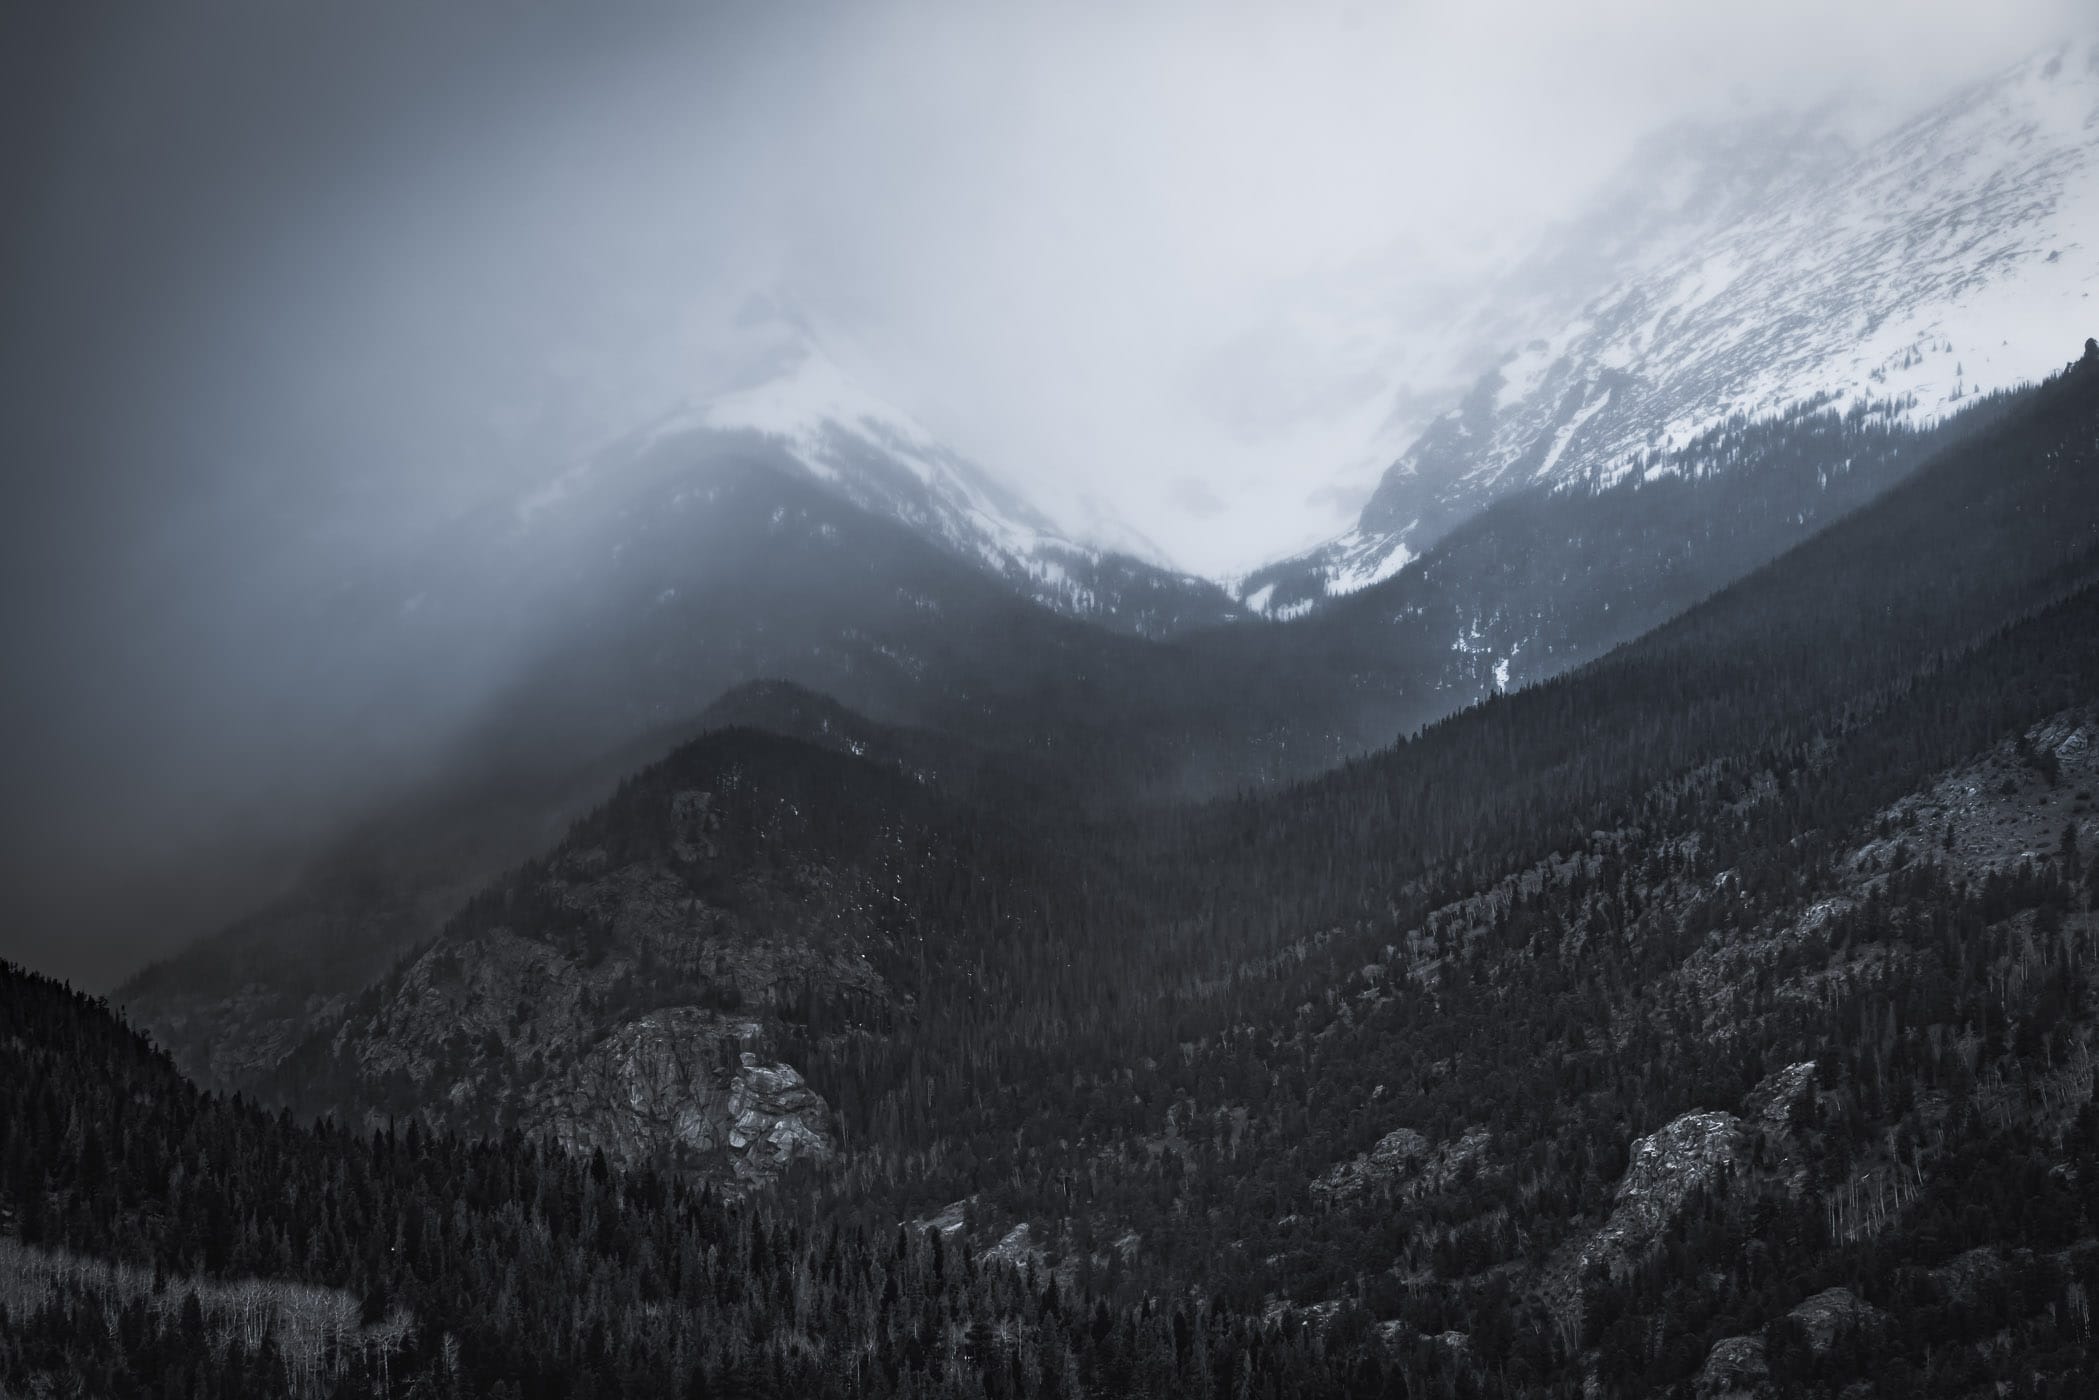 A late-winter storm blows in over the snowcapped mountains of Colorado's Rocky Mountain National Park.